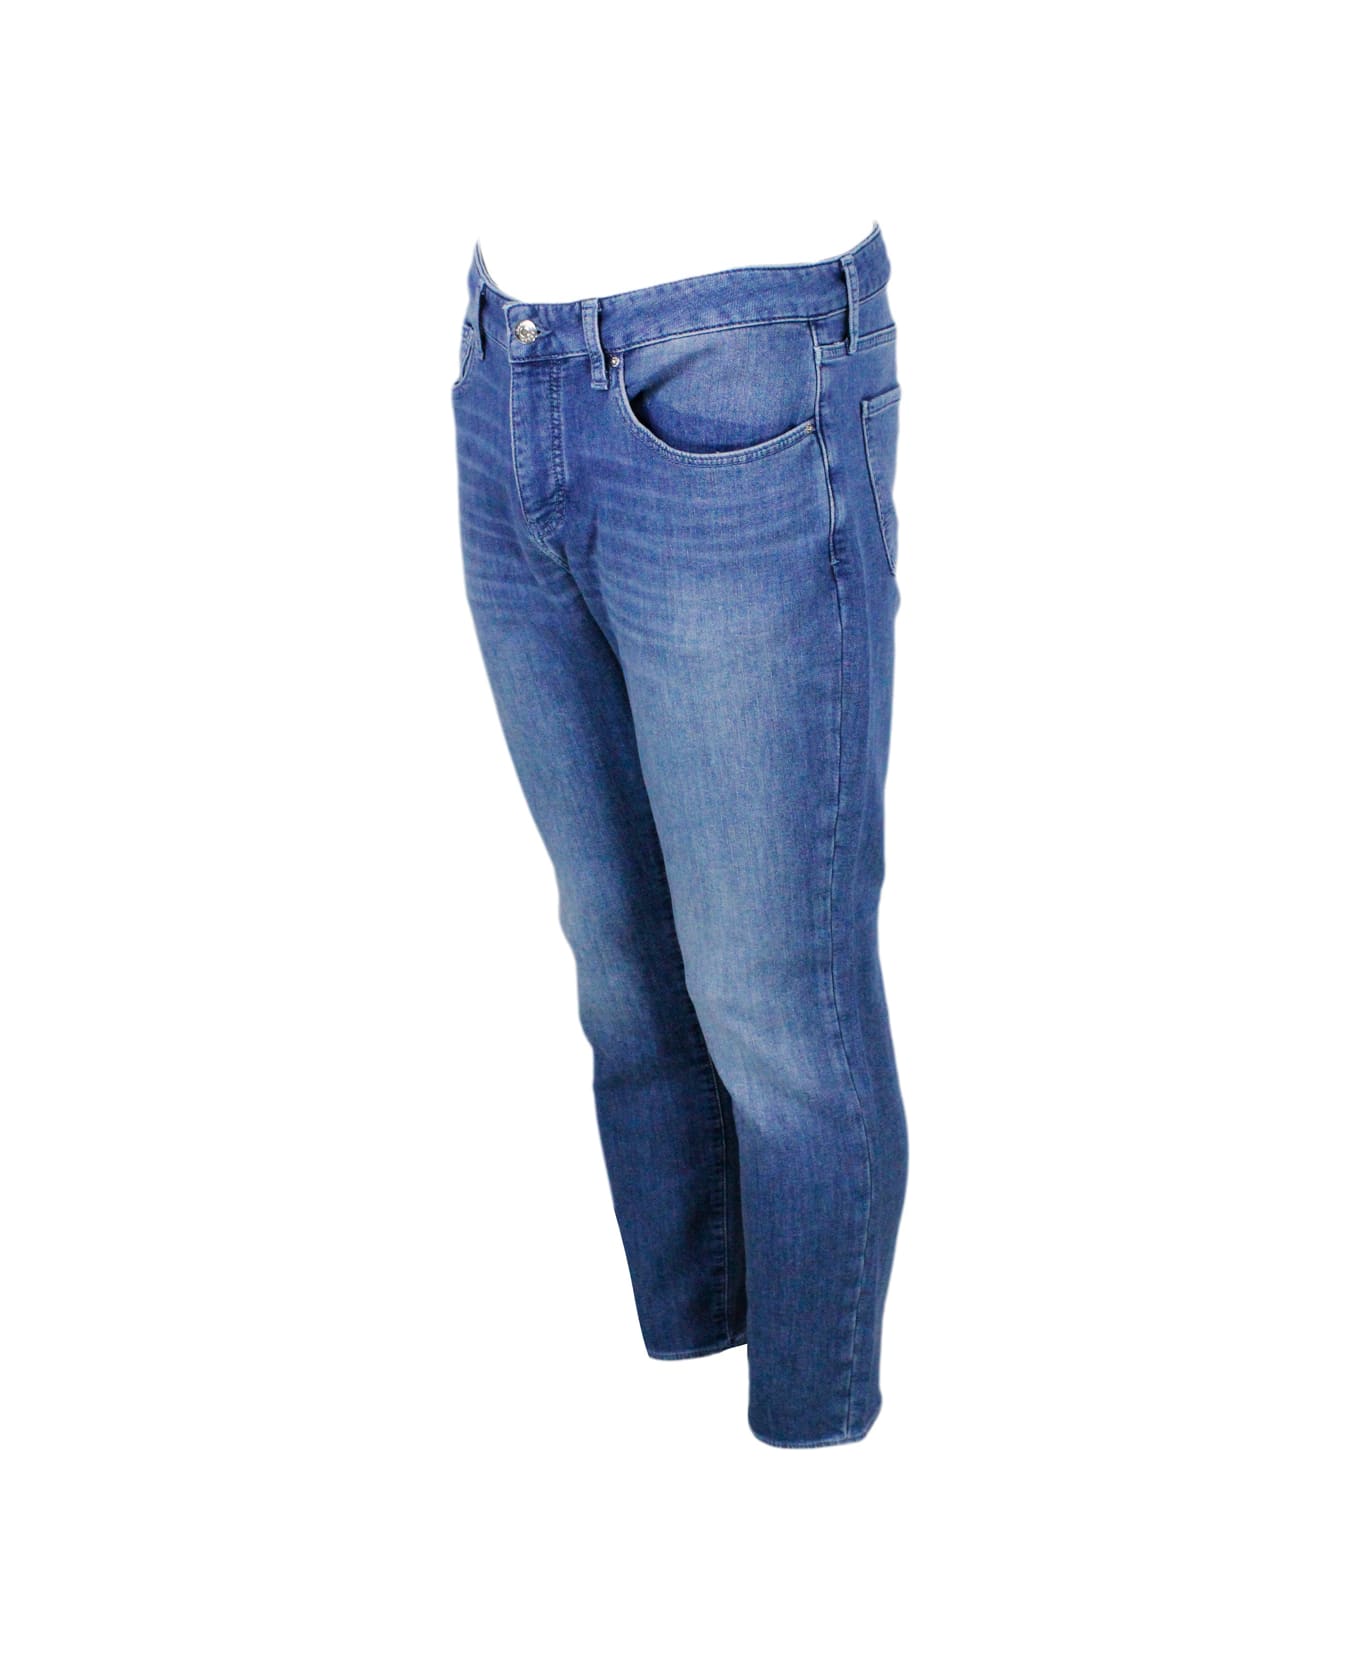 Armani Collezioni Skinny Jeans In Soft Stretch Denim With Matching Stitching And Leather Tab. Zip And Button Closure - Denim デニム